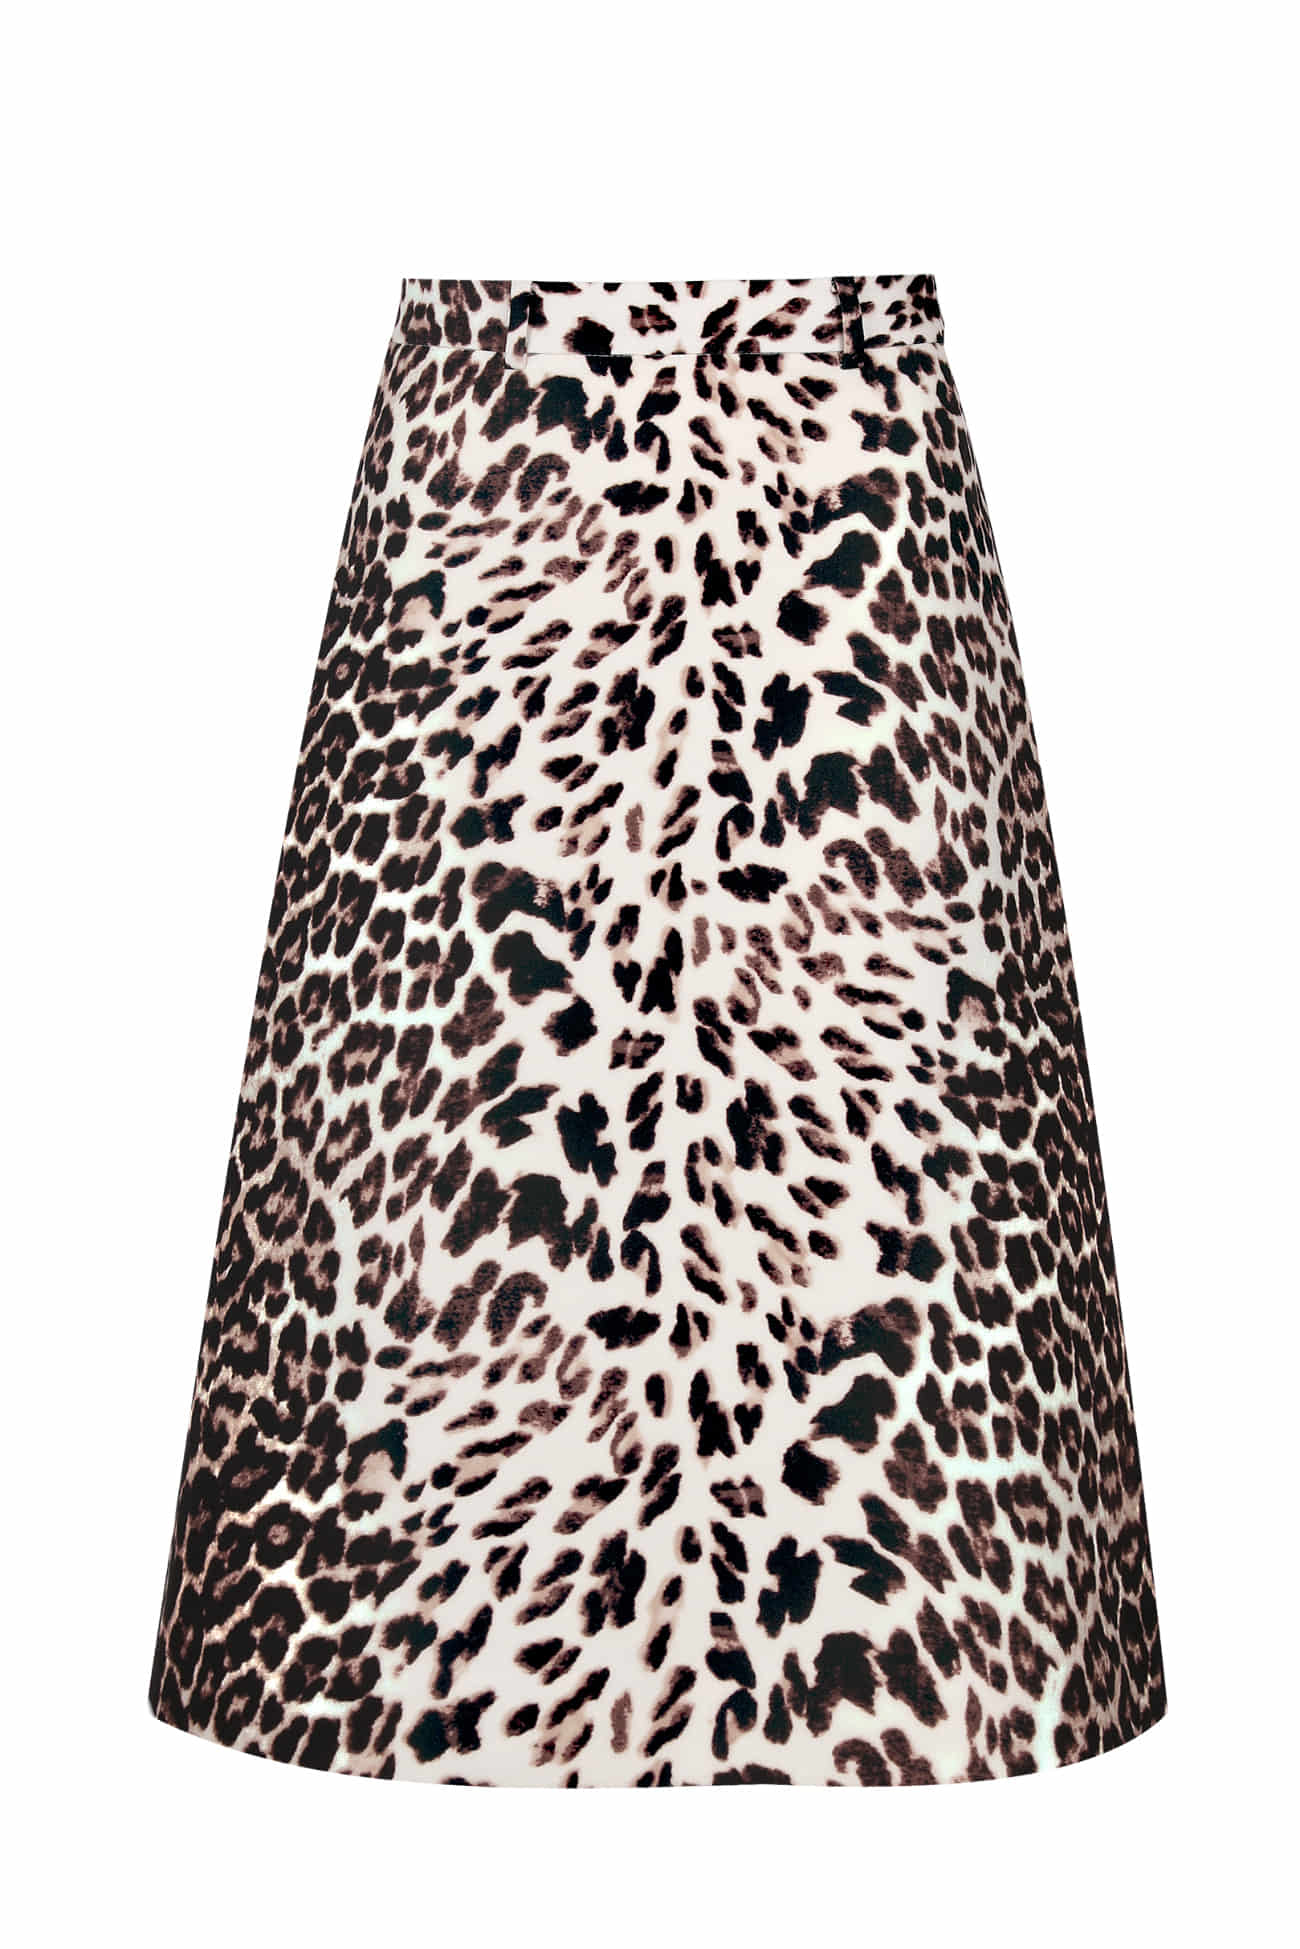 ICONIC CLASSICAL LEOPARD SKIRT